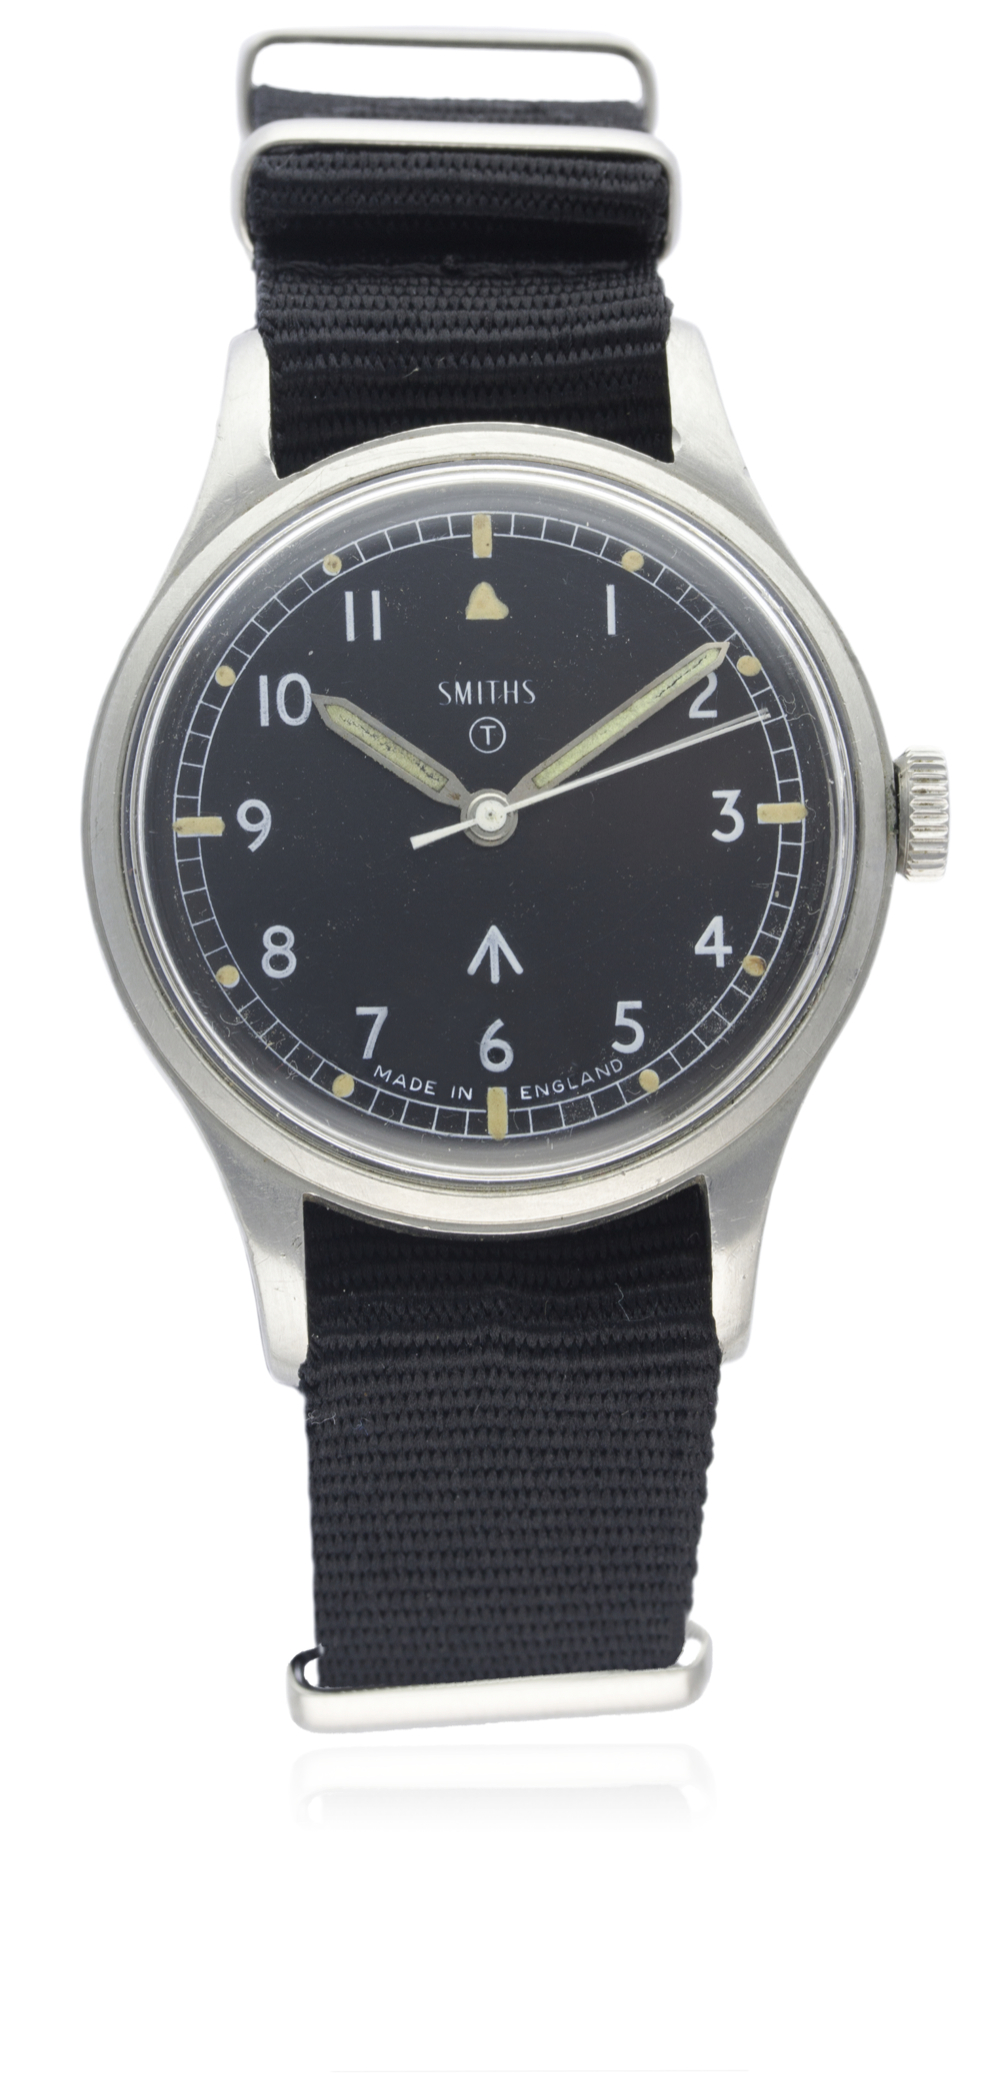 A GENTLEMAN'S STAINLESS STEEL BRITISH MILITARY SMITHS WRIST WATCH DATED 1969 D: Black dial with